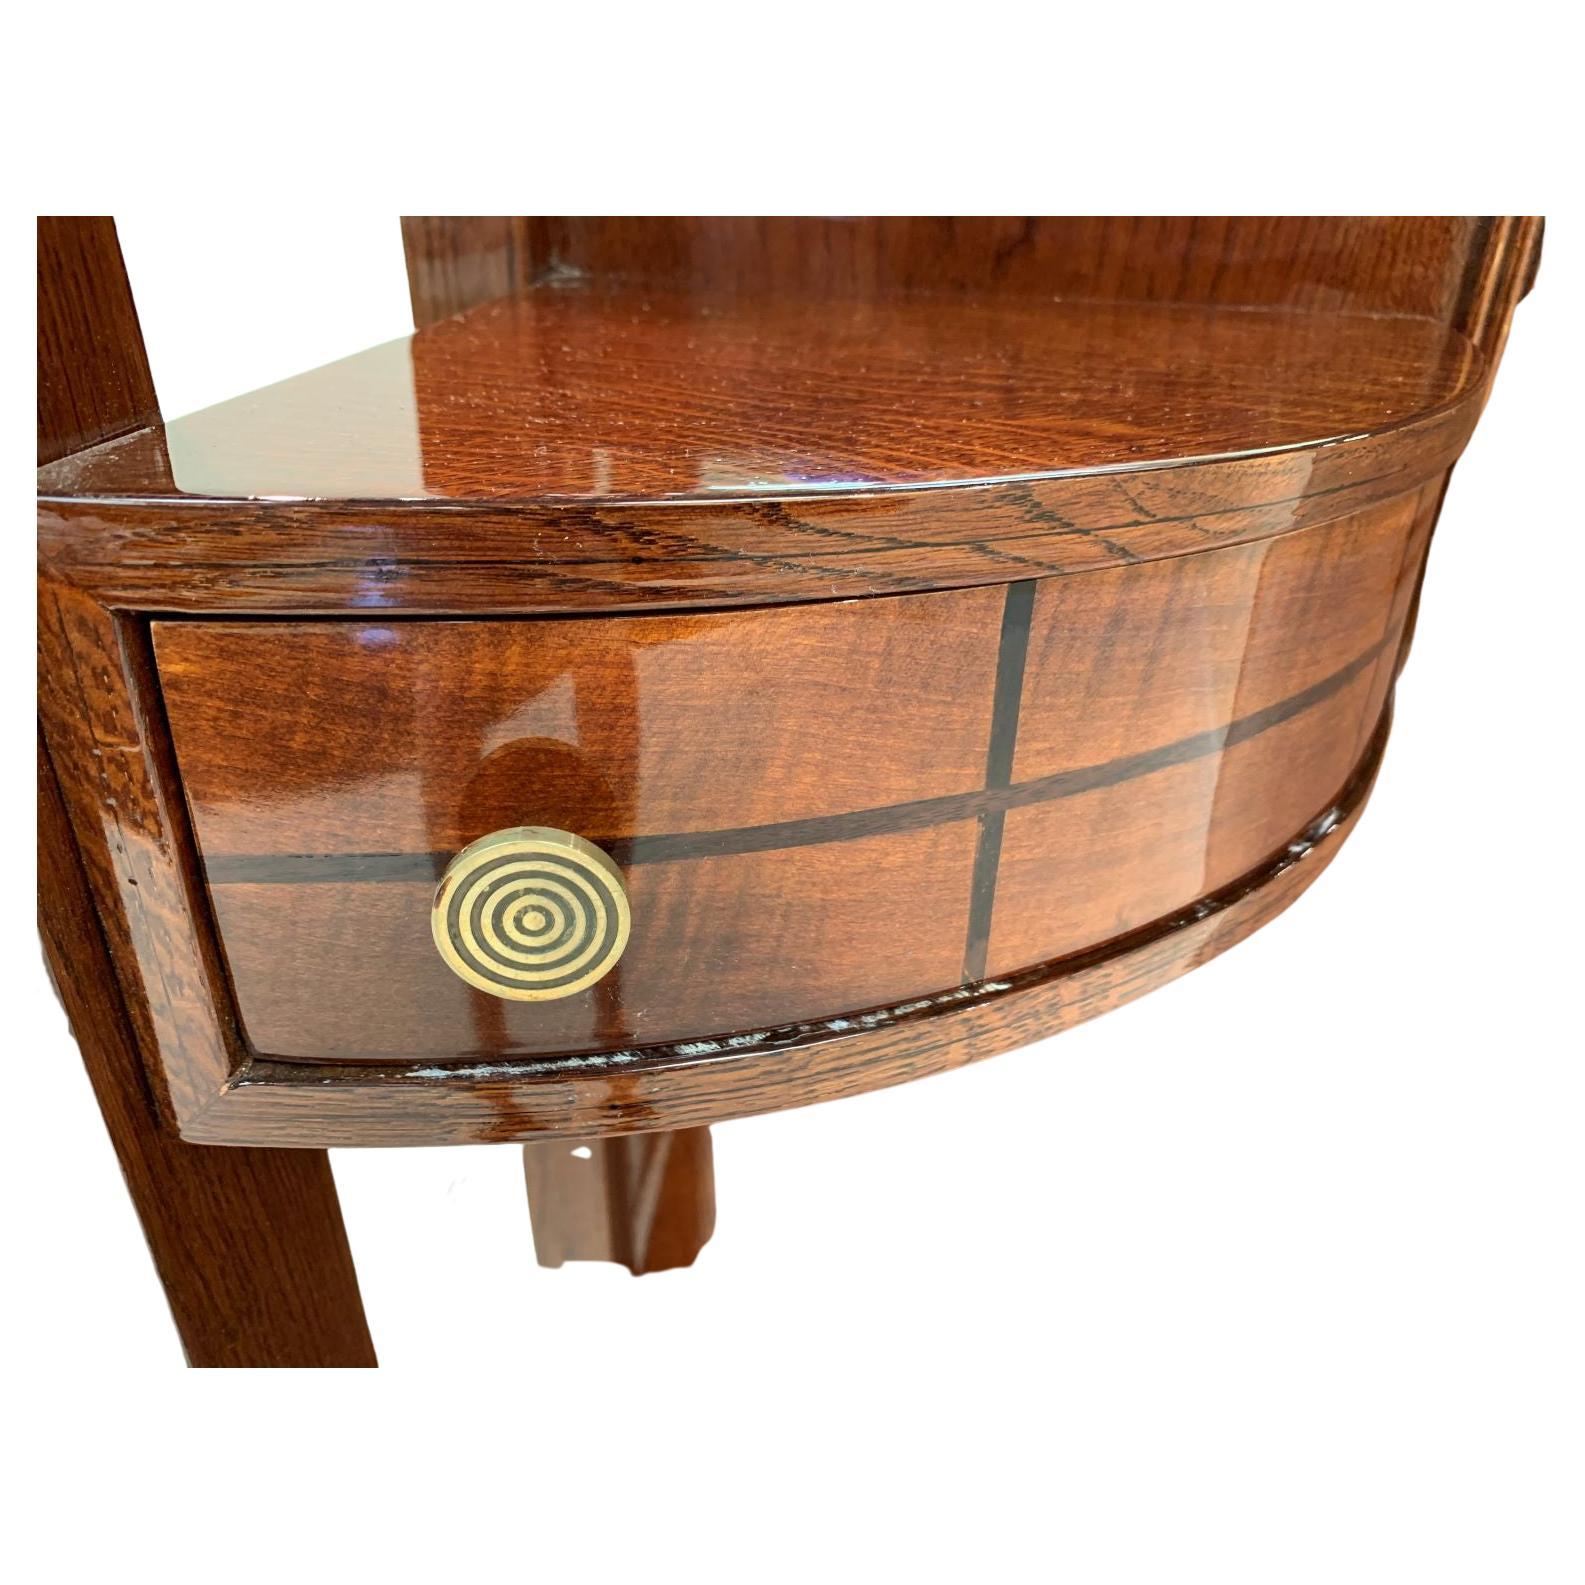 Brass Italian Art Deco Coat Rack in the Style of Paolo Buffa in Rosewood and Maple For Sale